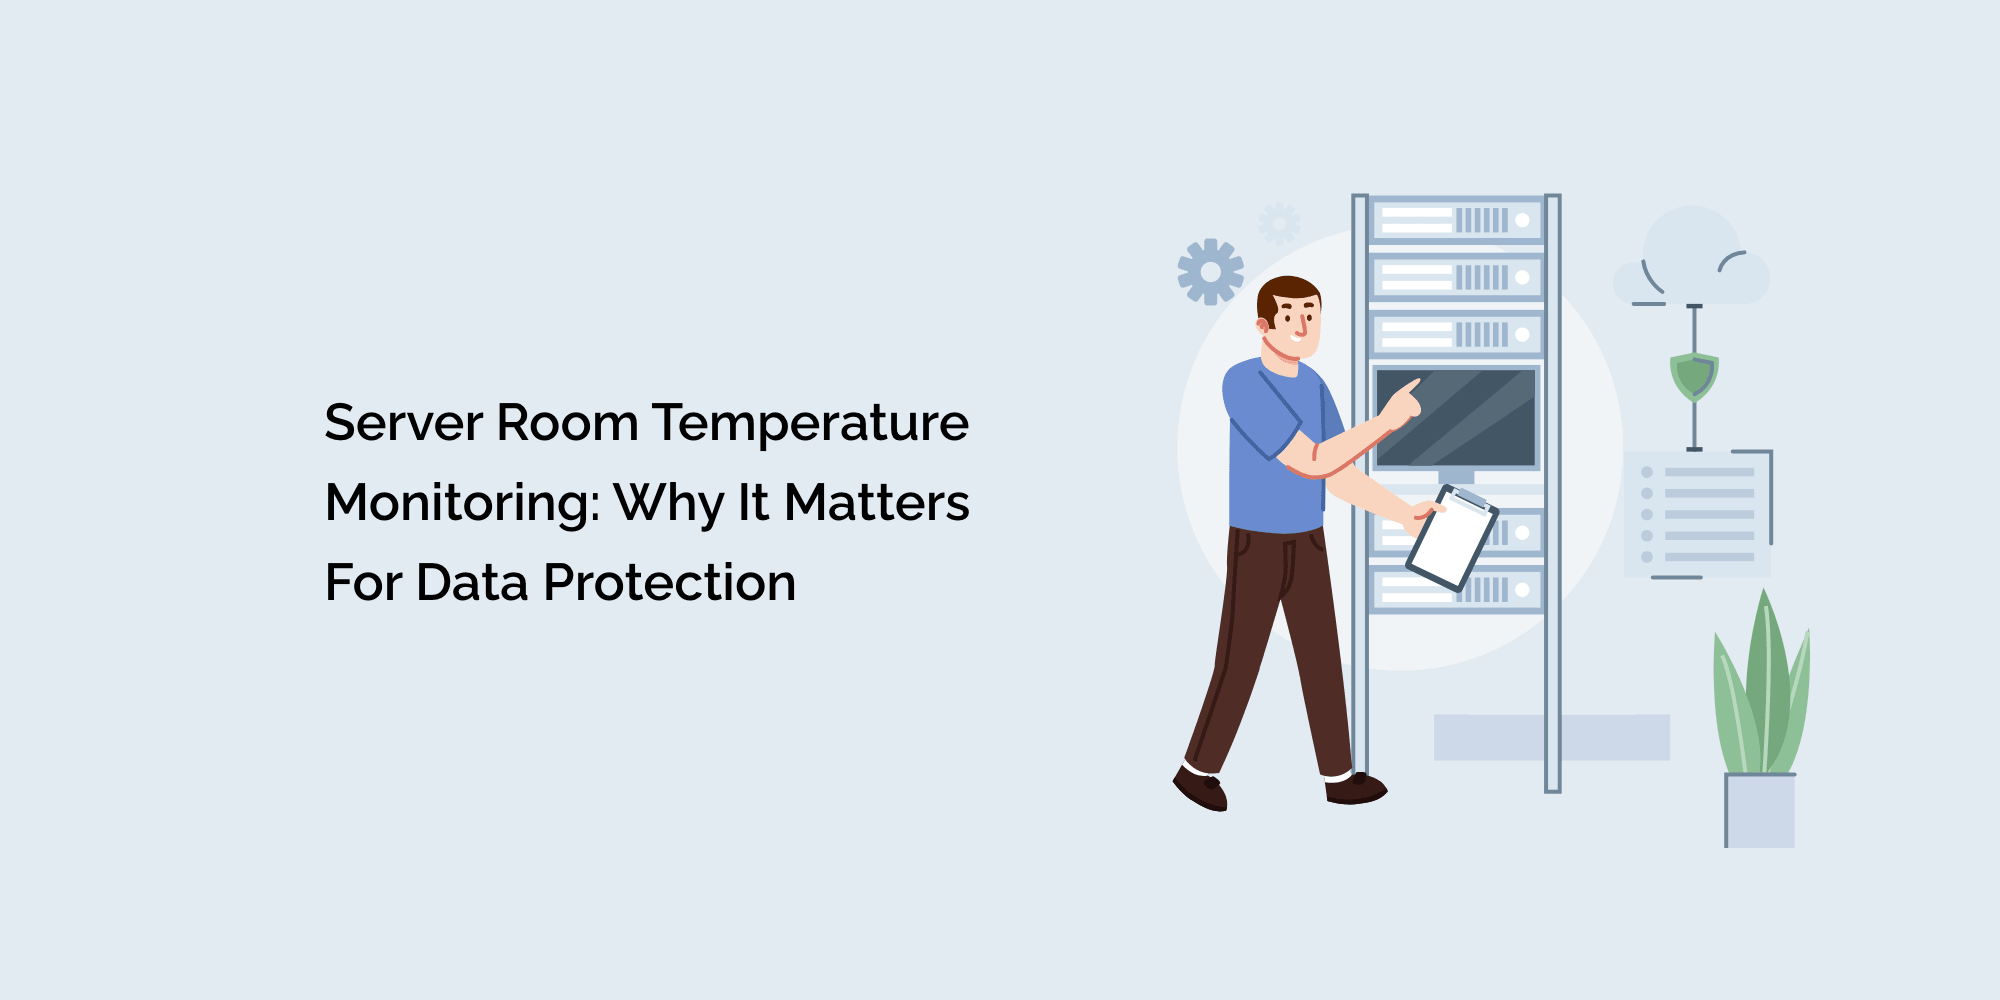 Server Room Temperature Monitoring: Why It Matters for Data Protection